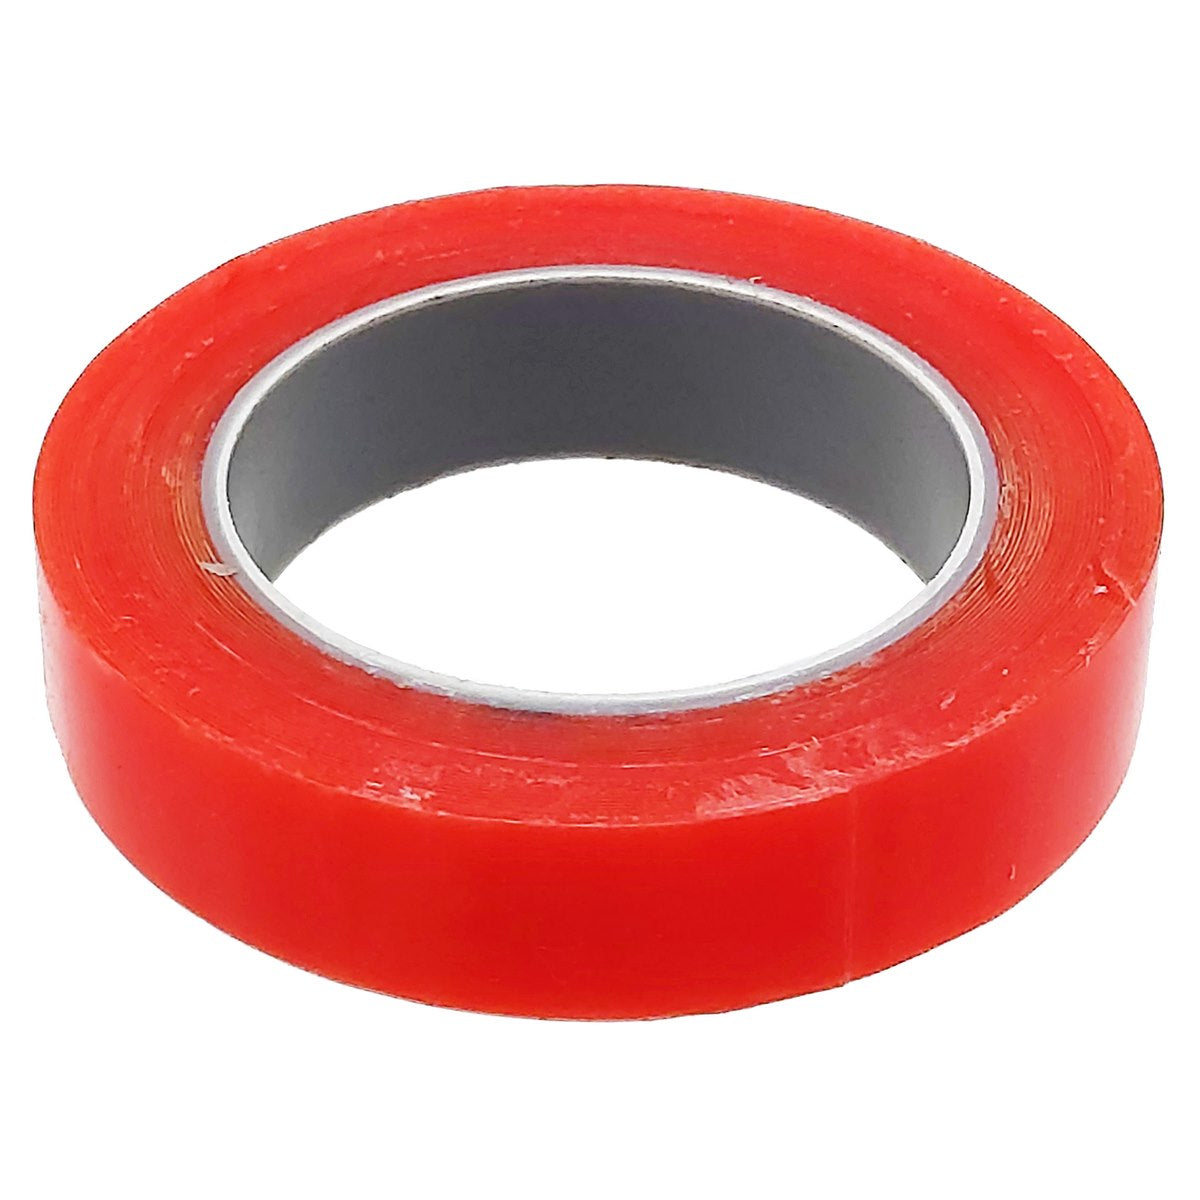 jags-mumbai Two way tape Tape Double Sided Red 5Mtr 12mm